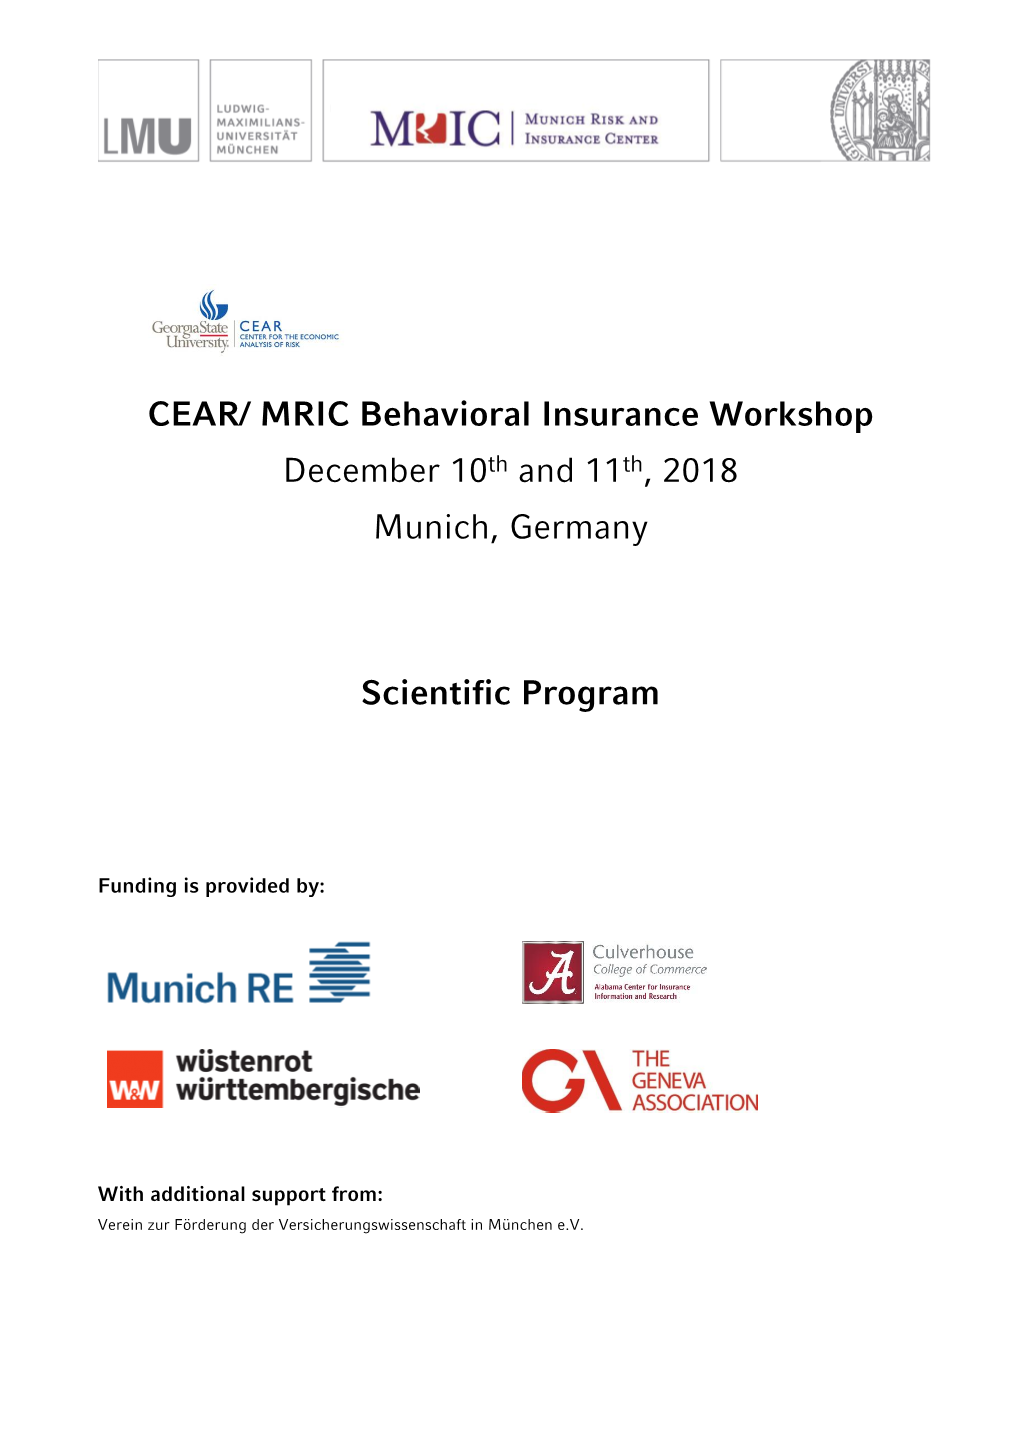 MRIC Behavioral Insurance Workshop December 10Th and 11Th, 2018 Munich, Germany